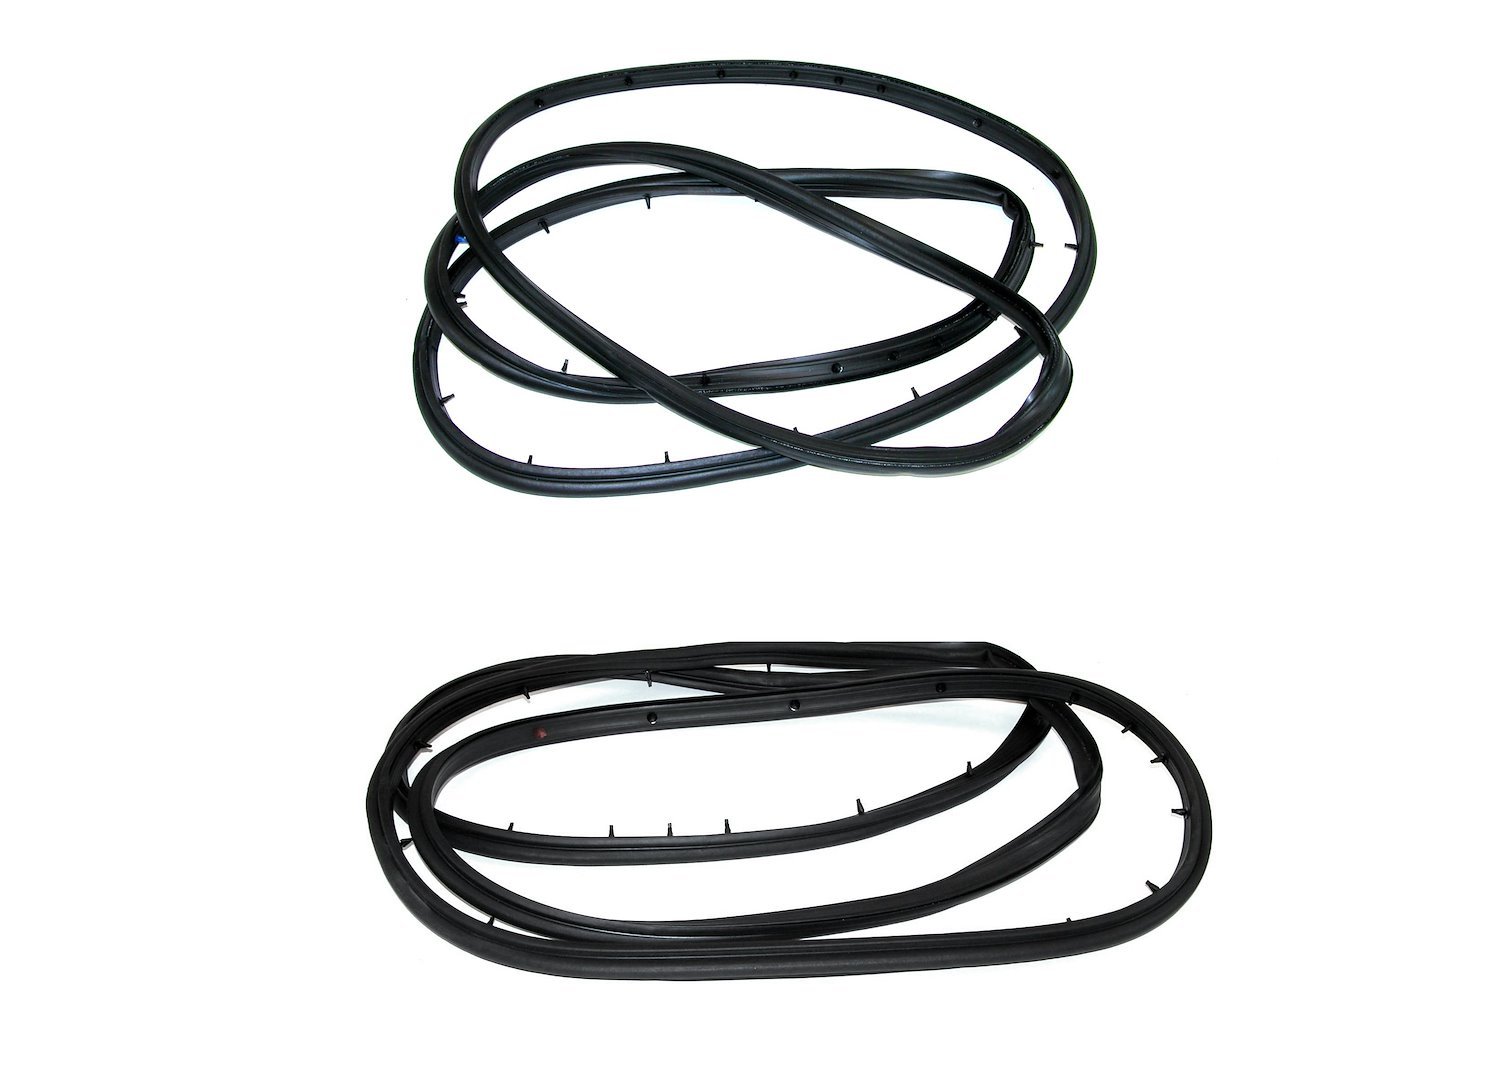 FC-KF3052 Door Seal Kit, Front Left & Right for 2001-2004 Ford F-150, 1997-1997 Ford F-250, 1999-2004 Ford F-250 Super Duty